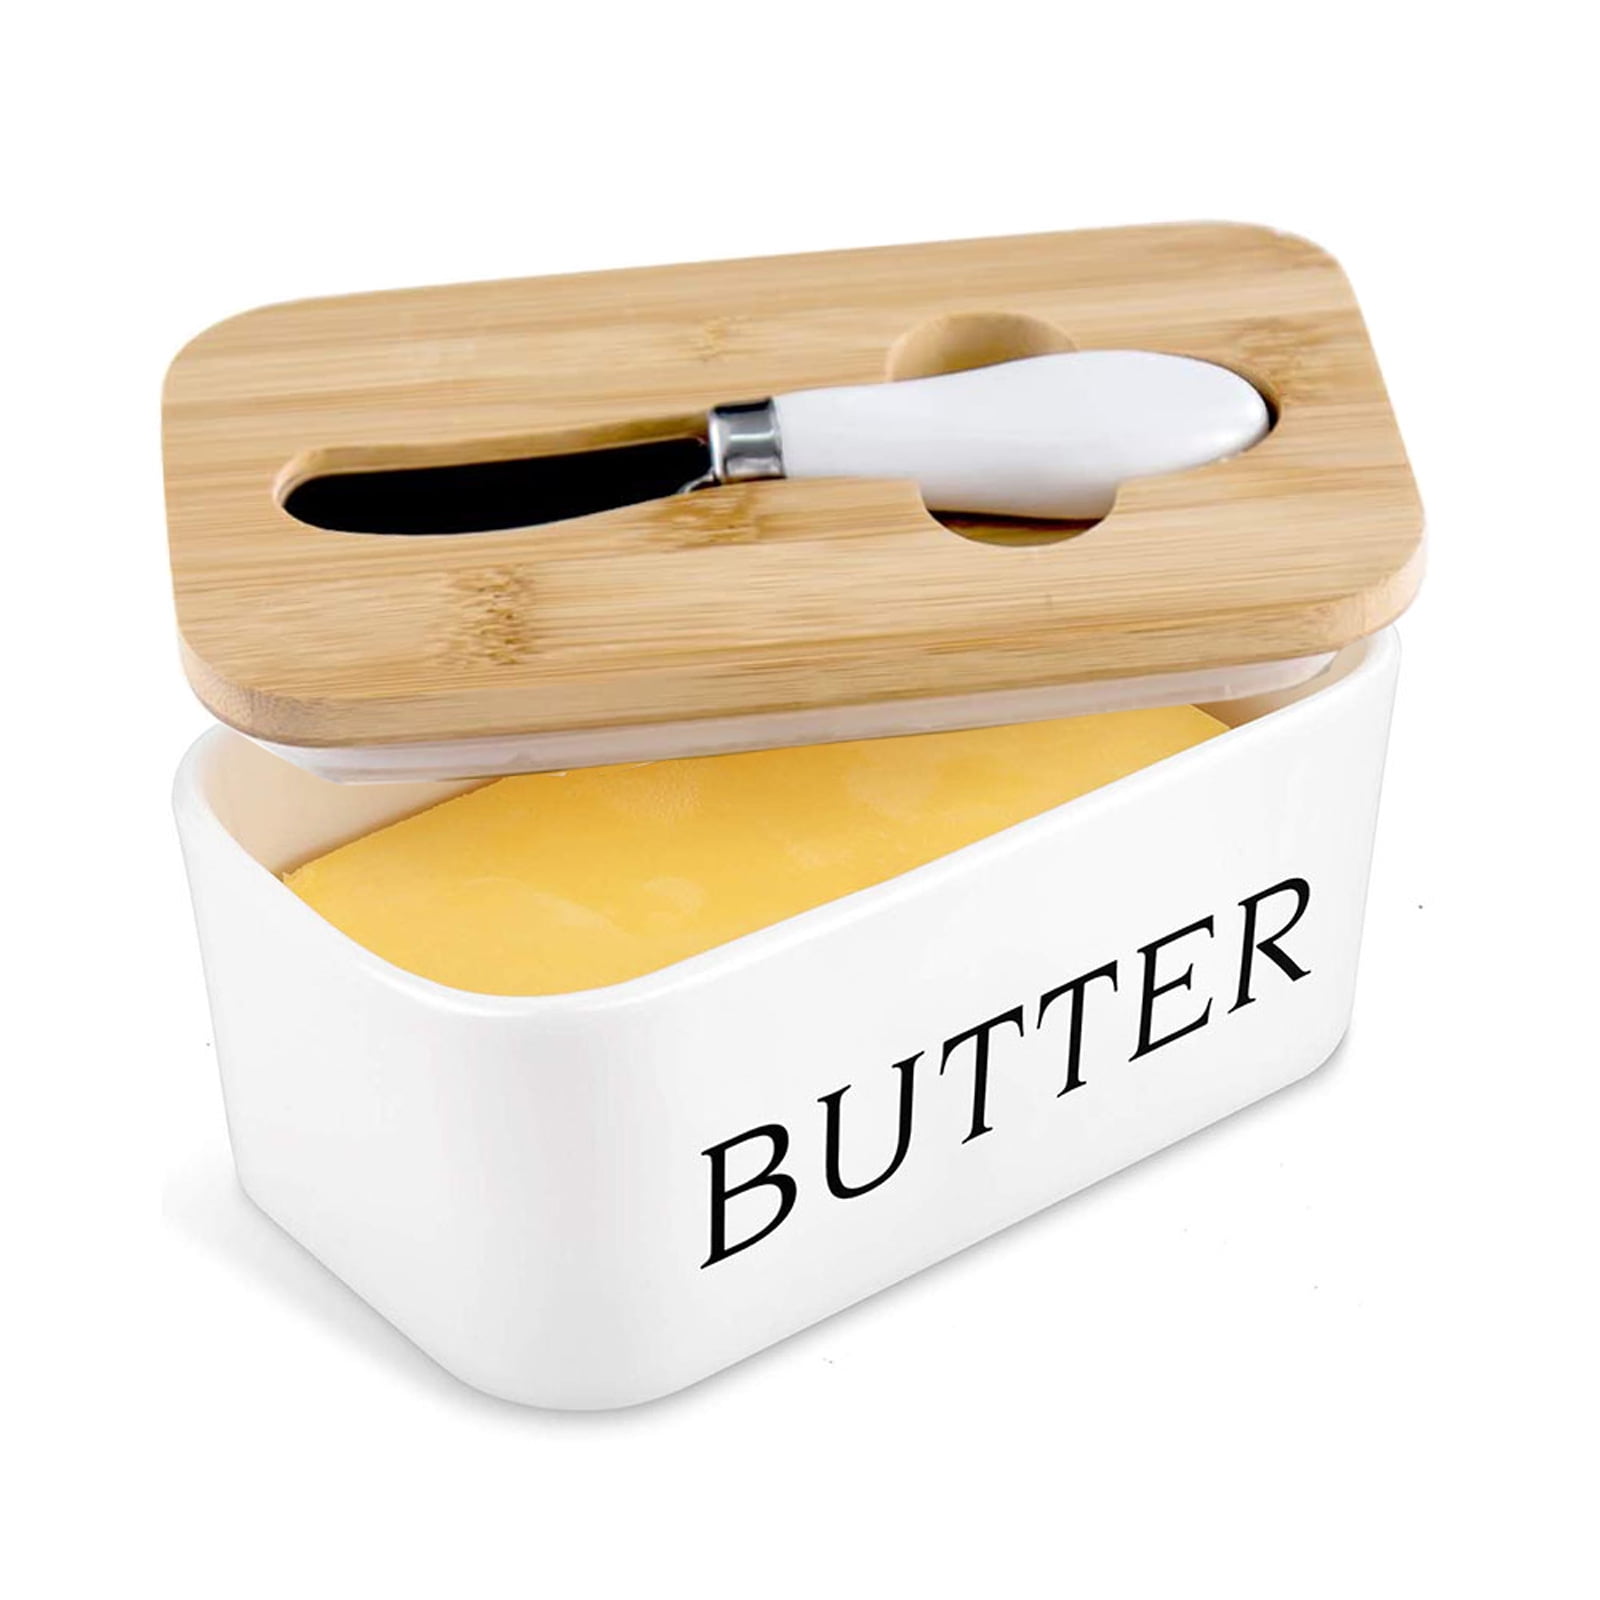 Butter Dish with Lid,Large Ceramic Butter Keeper Container with Wood Lid Covers and Butter Knife,Holds Up to 2 Standard Butter Sticks,White 